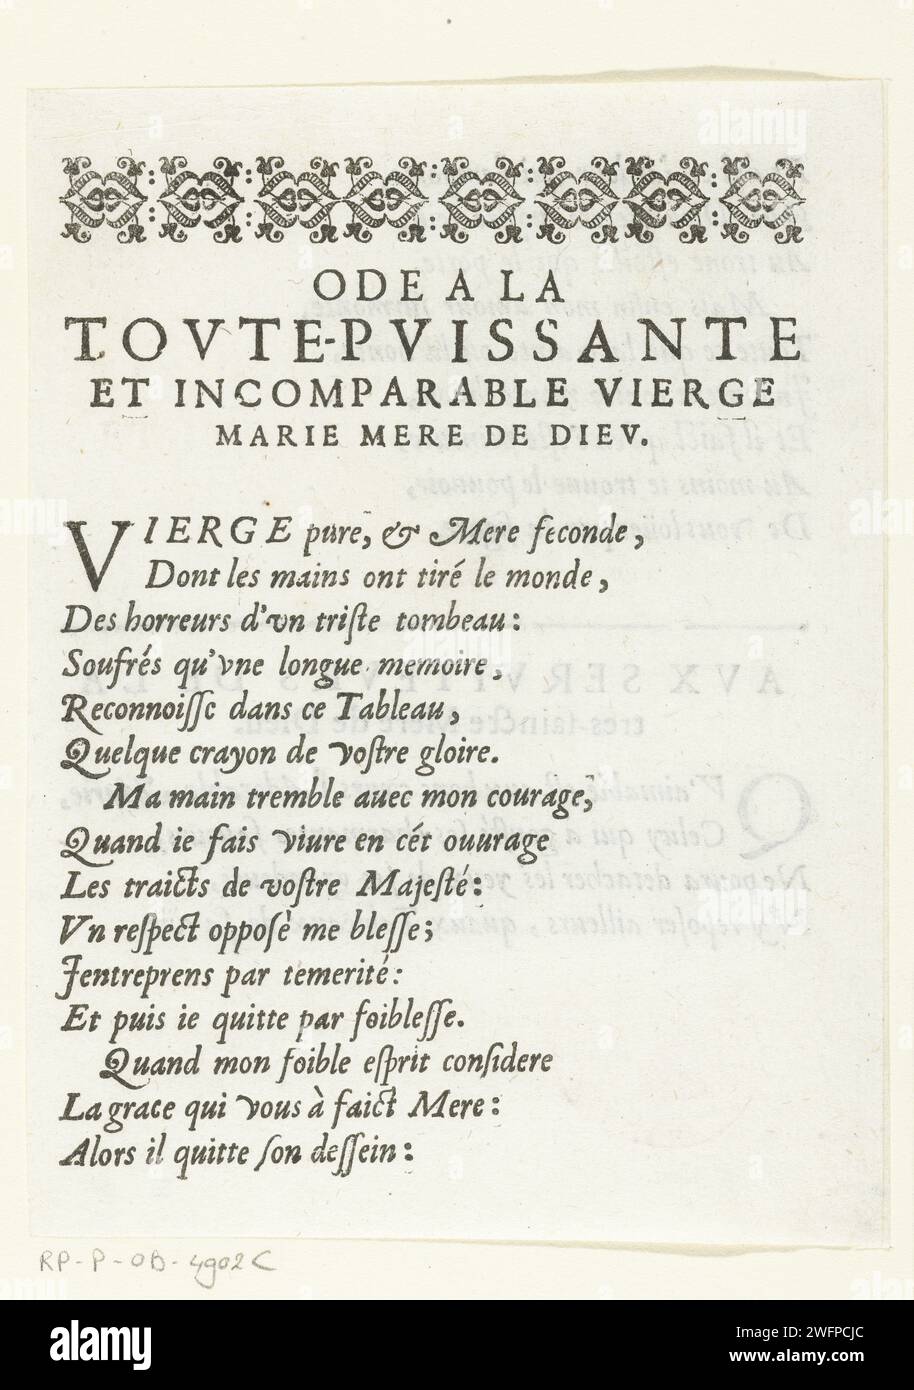 Lofzang on Maria, belonging to the emblem series 'Life of Maria in Emblemen', 1625 - 1629 text sheet A praising text, addressed to Mary, set in French verses. This magazine (printed on both sides) is part of the first state of the emblem series 'Life of Maria in Emblemen', which includes two hydrangations and 26 emblems in addition to a title page and this hymn. Francepublisher: Franceprint maker: Nancy paper letterpress printing Stock Photo